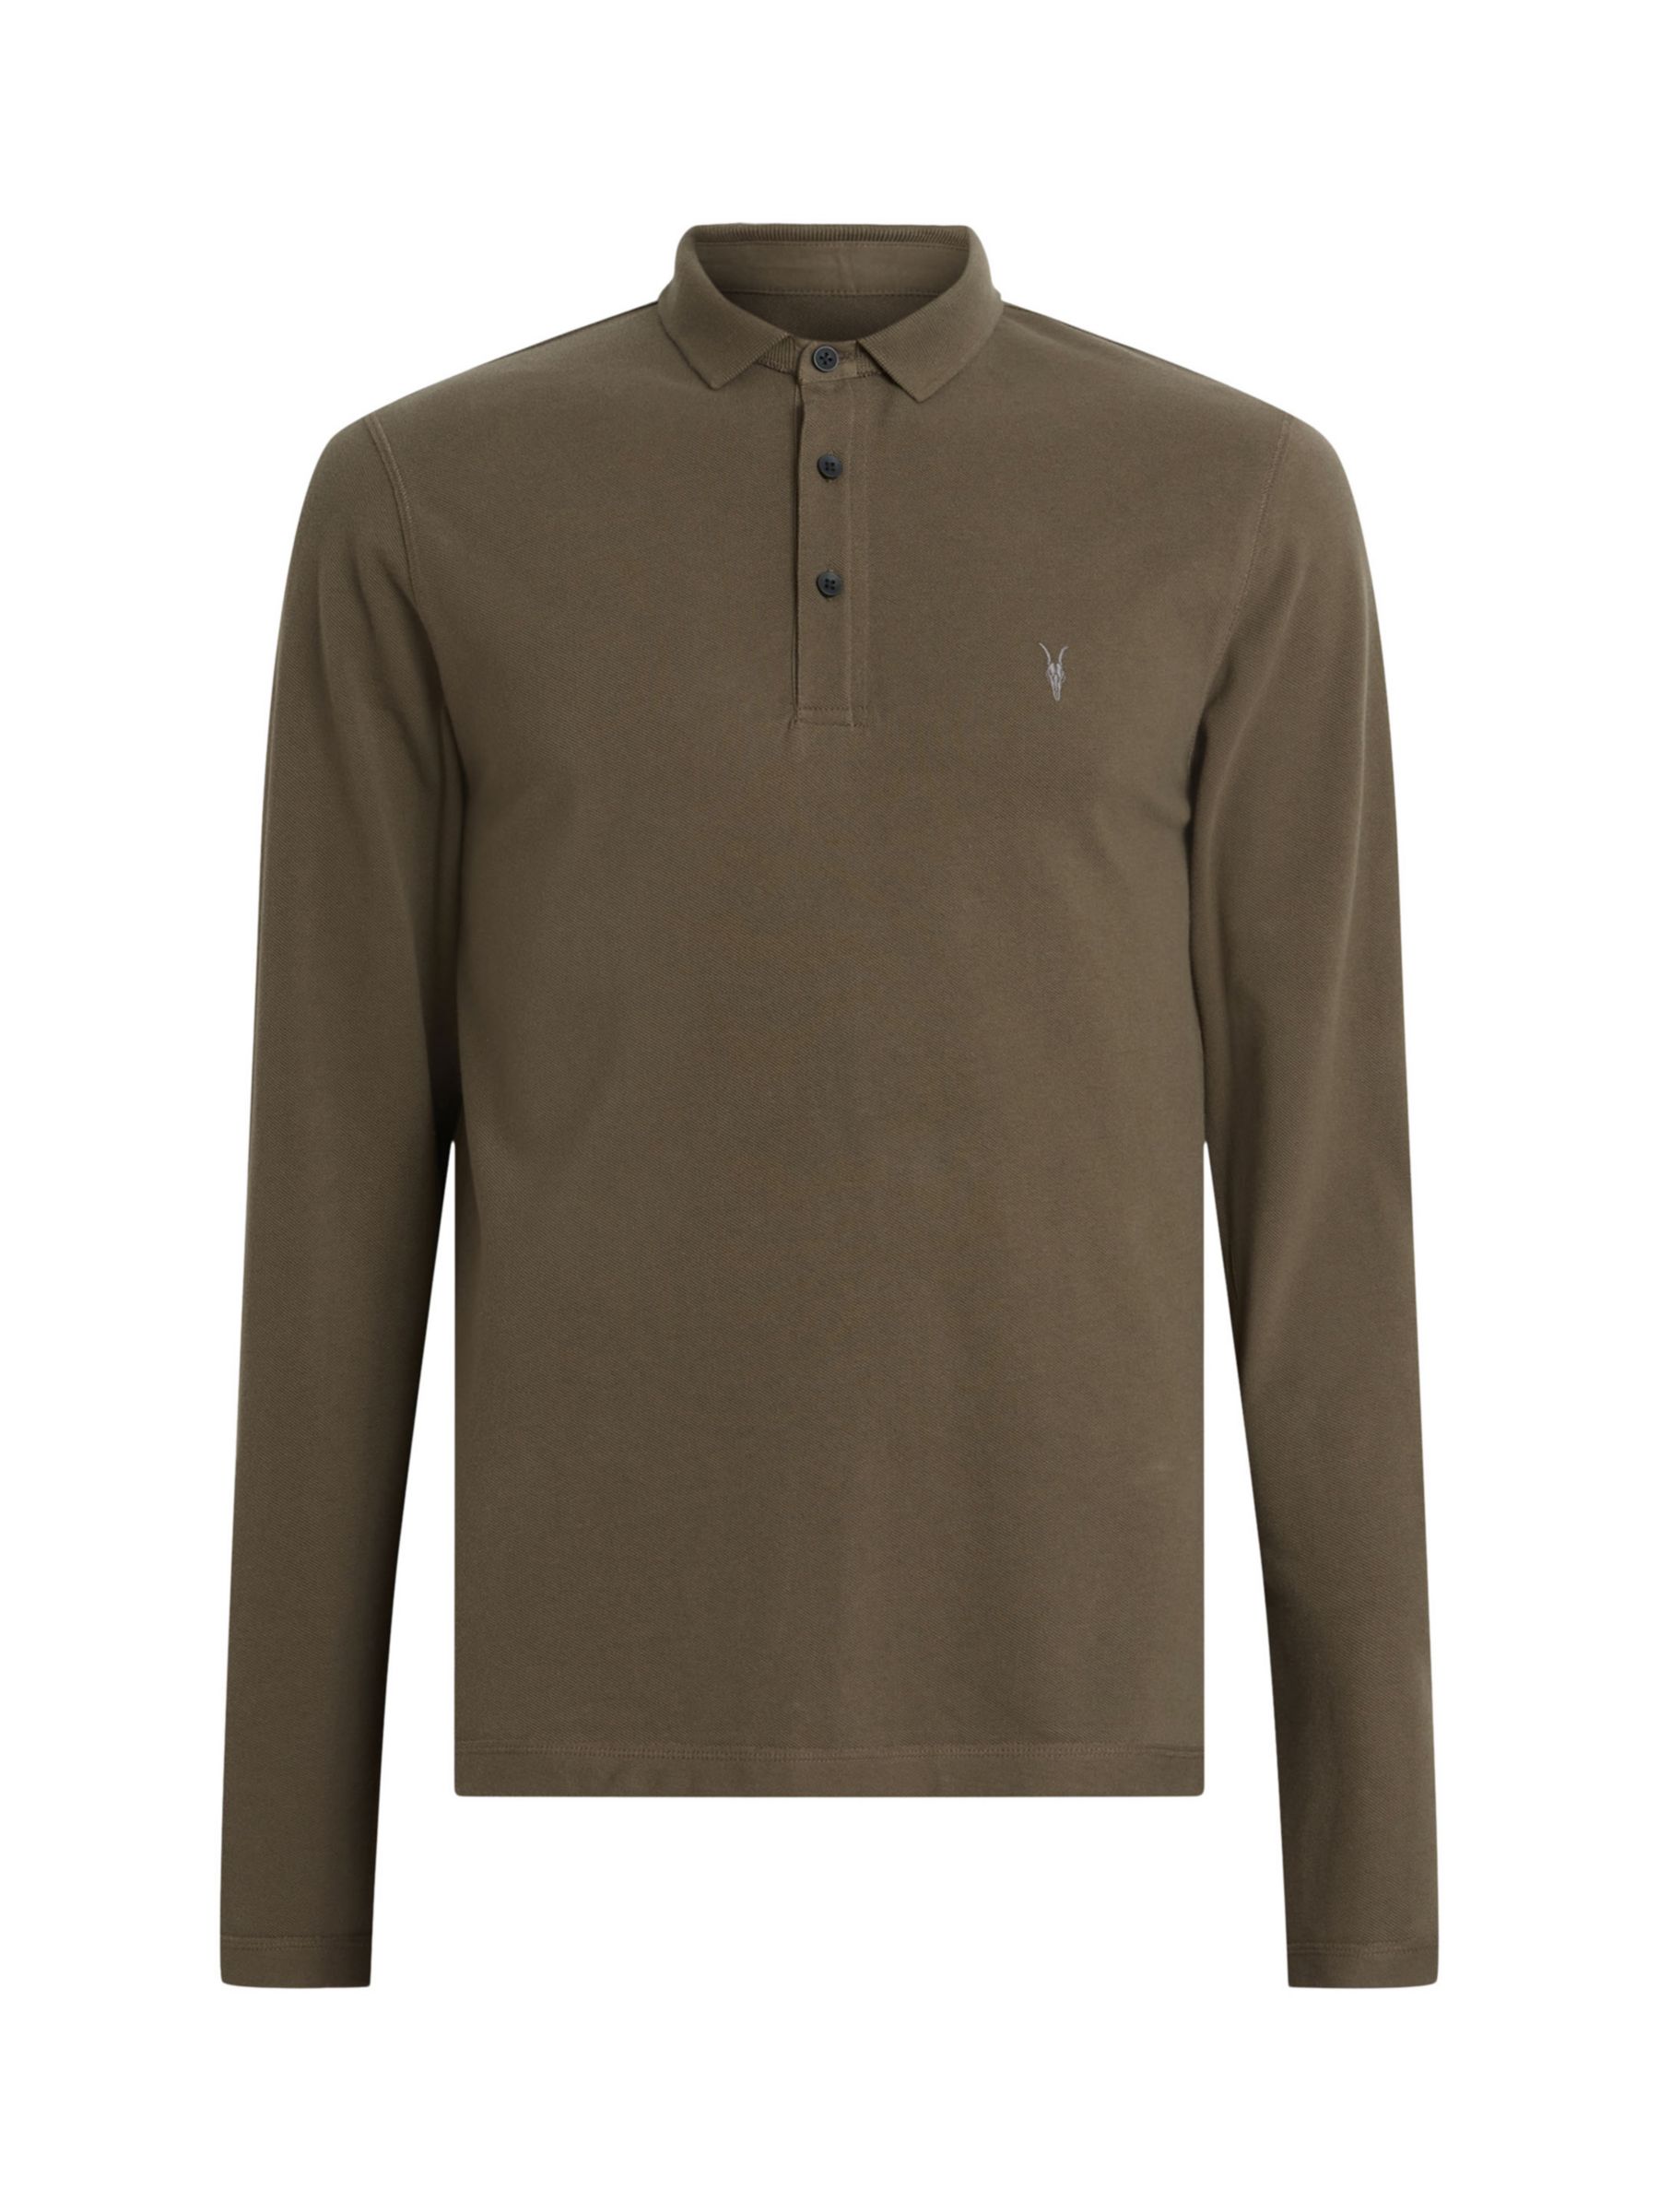 Buy AllSaints Reform Organic Cotton Long Sleeve Polo Top Online at johnlewis.com